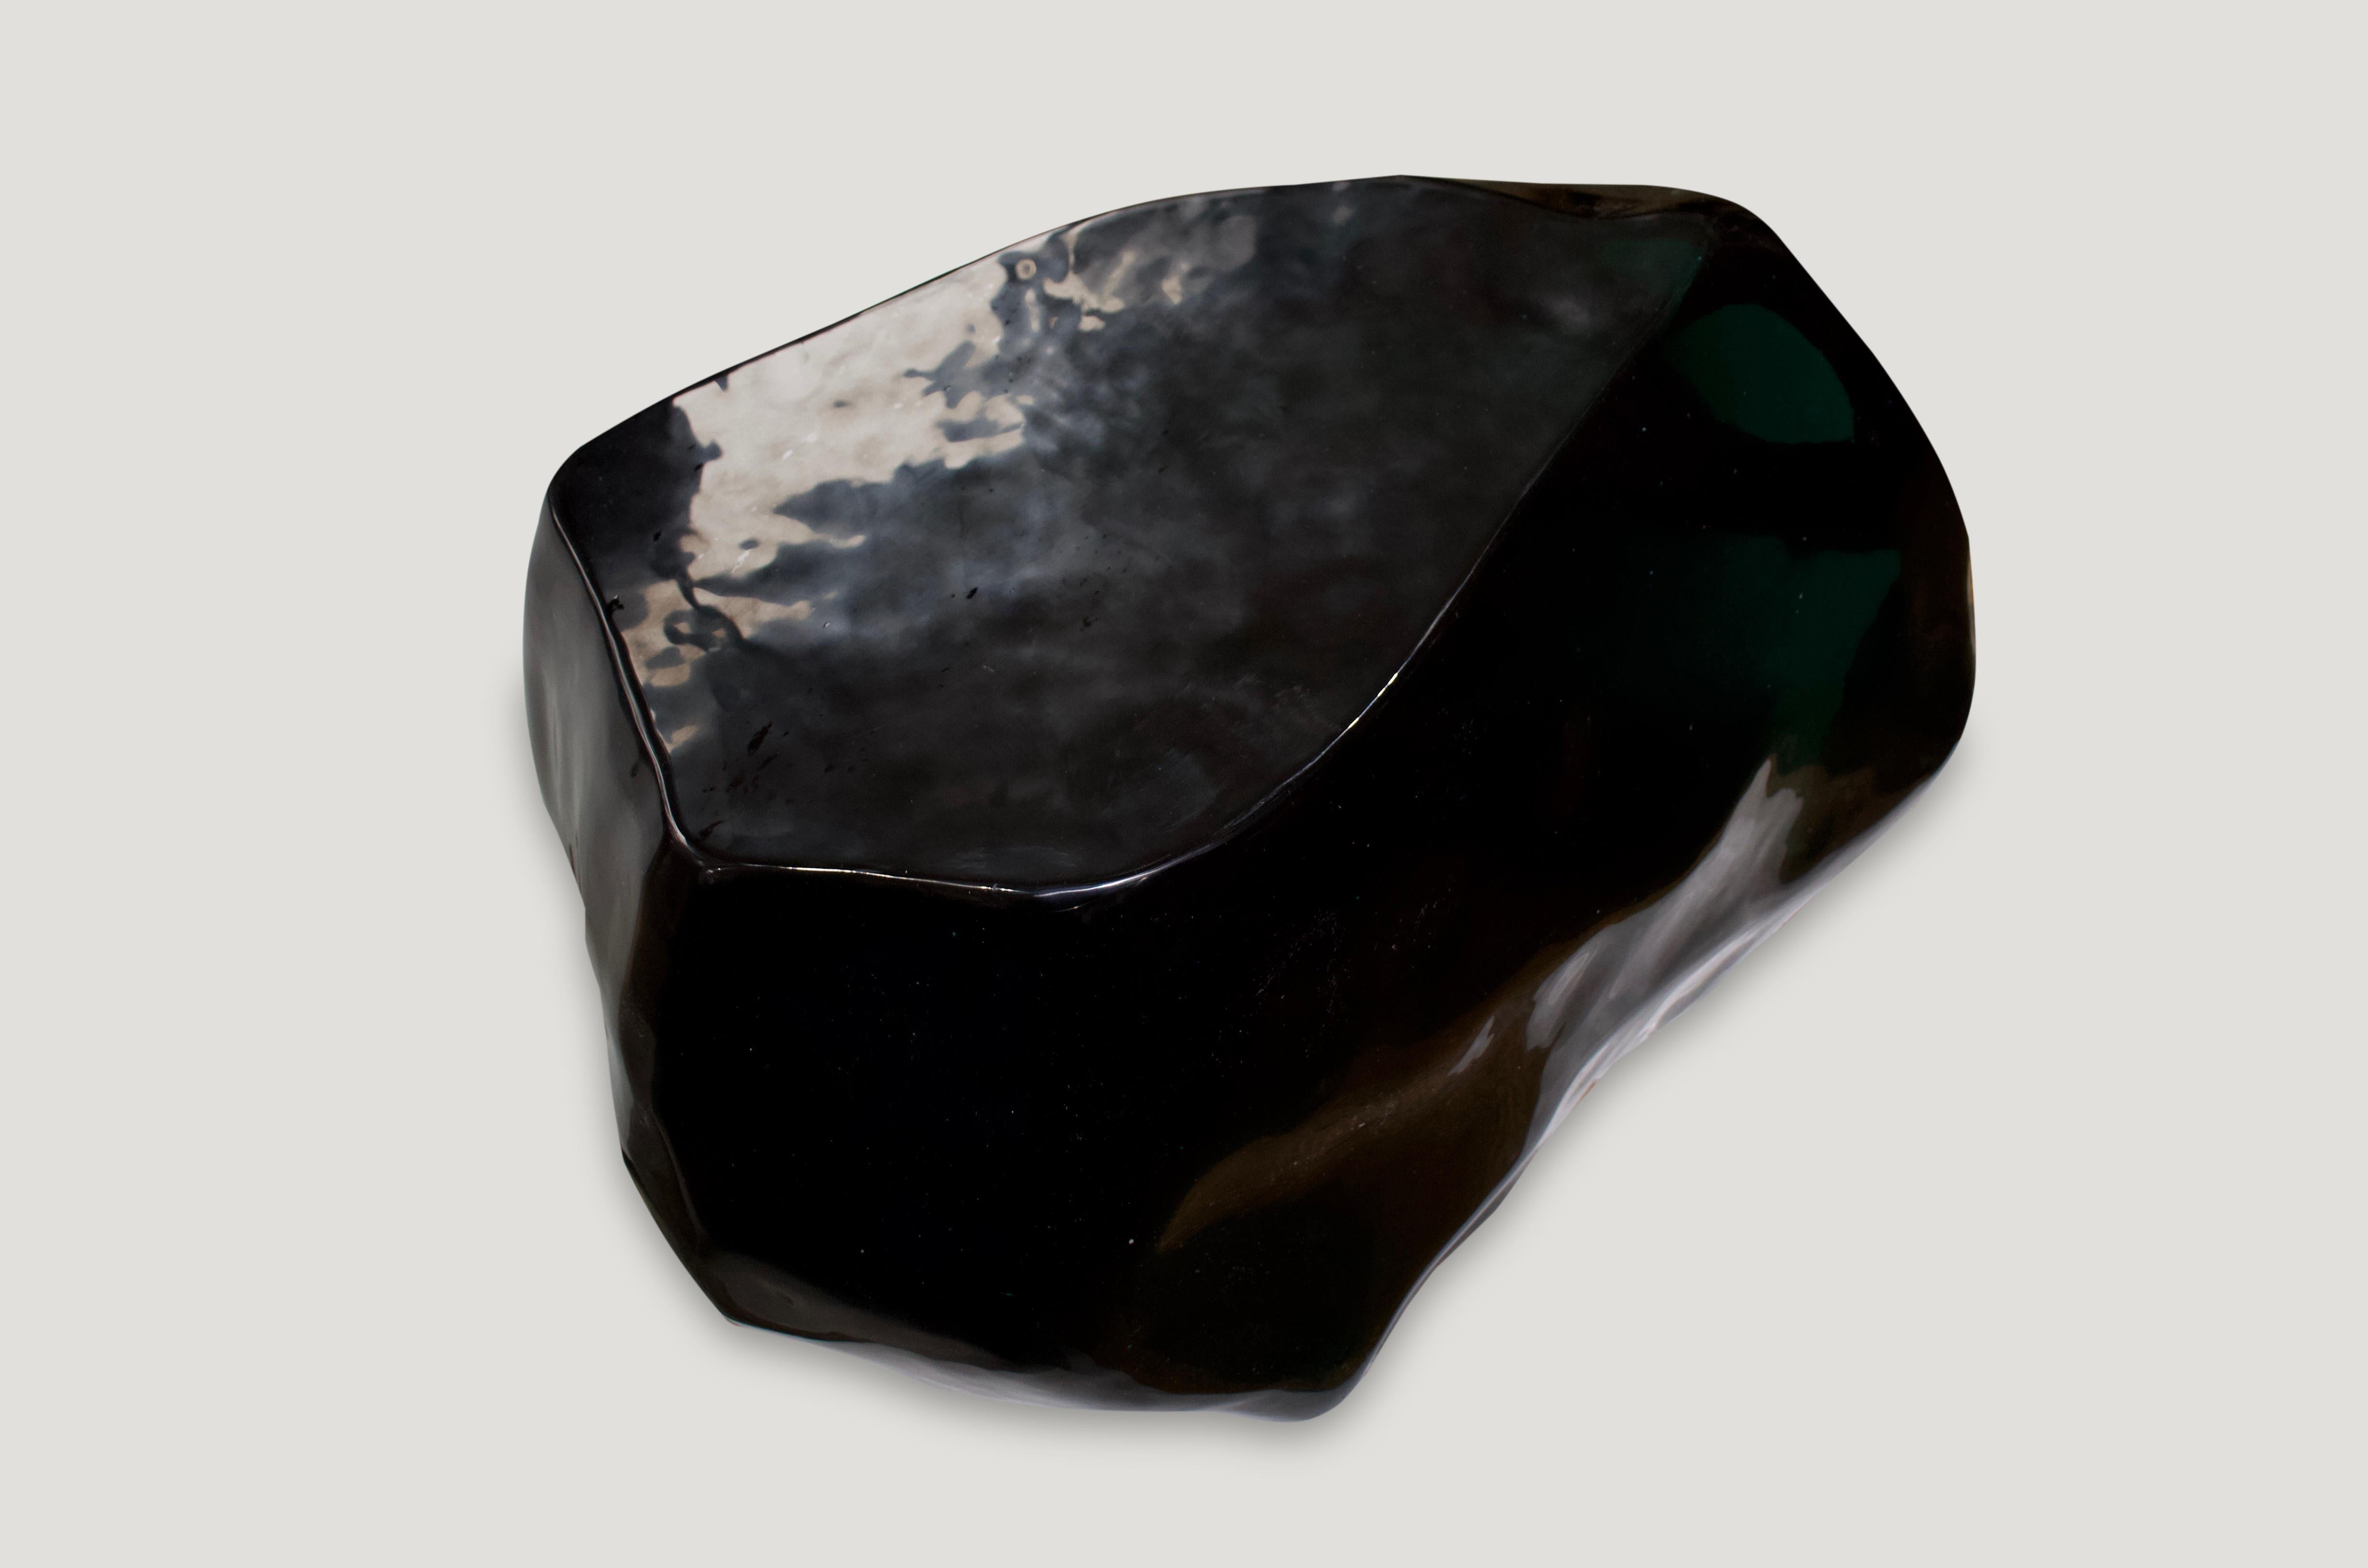 Rare obsidian side table or coffee table. Obsidian is a naturally occurring volcanic glass formed as an extrusive igneous rock, millions of years old.

Impressive for any space. When light or natural sunlight hits the glass they are truly